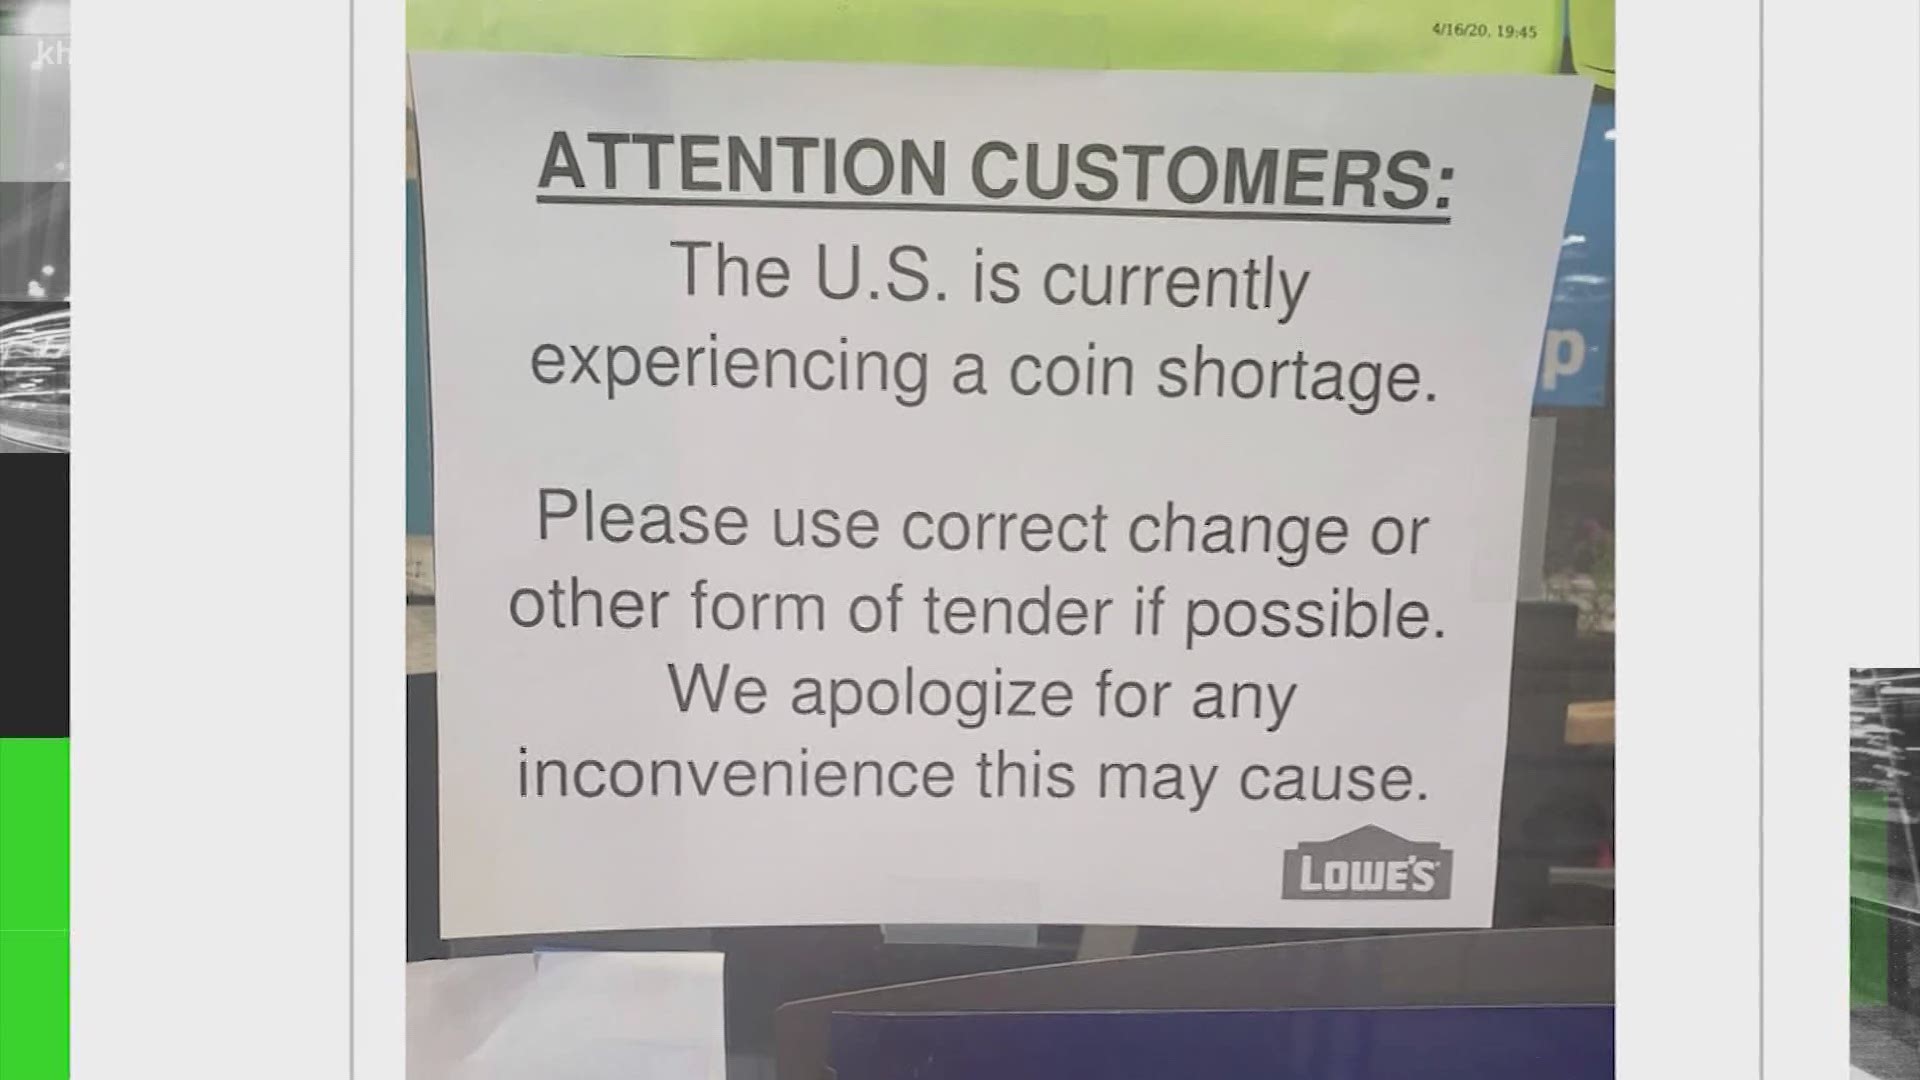 Is the pandemic causing a coin shortage? Someone asked the Verify team that question after seeing a notice at a local store.